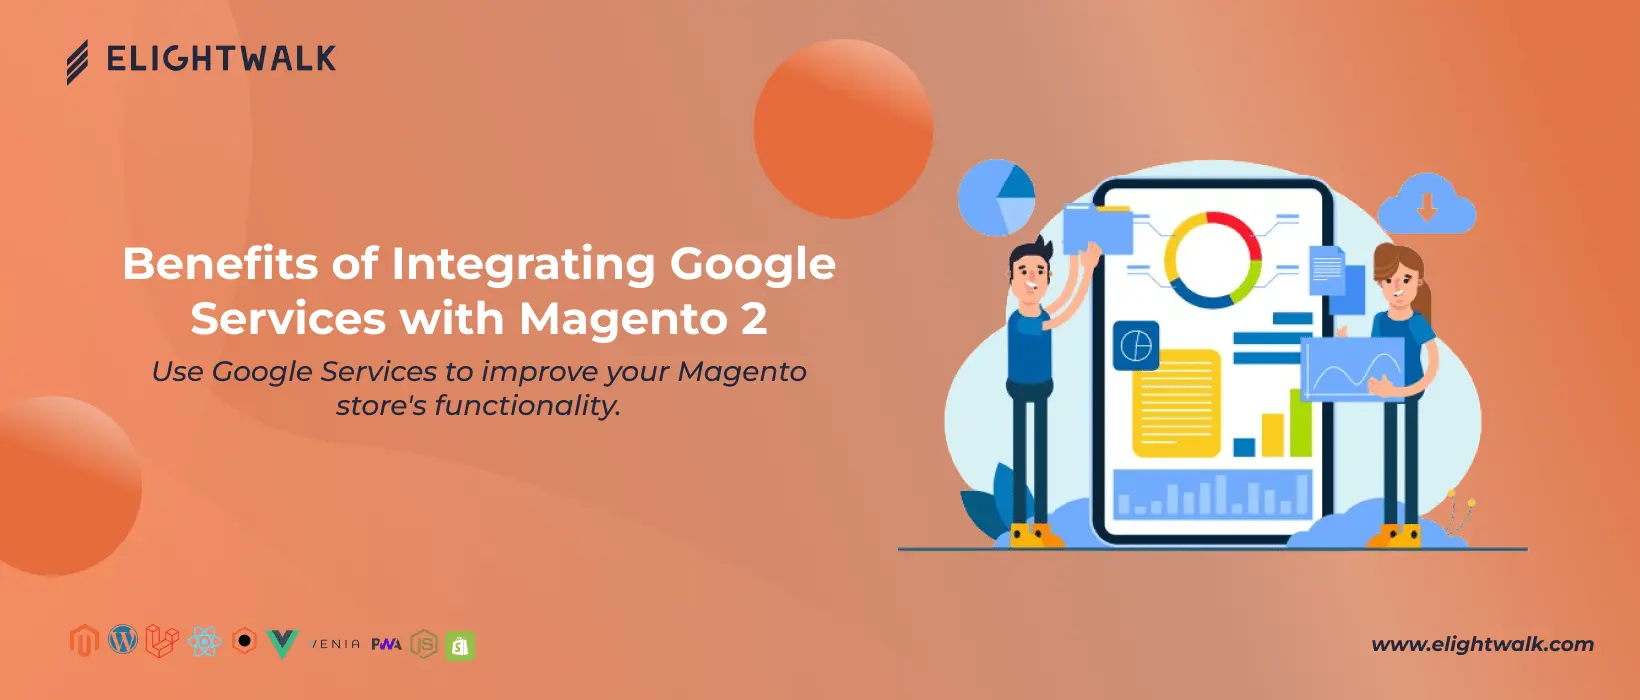 Benefits of integrating google service in magento